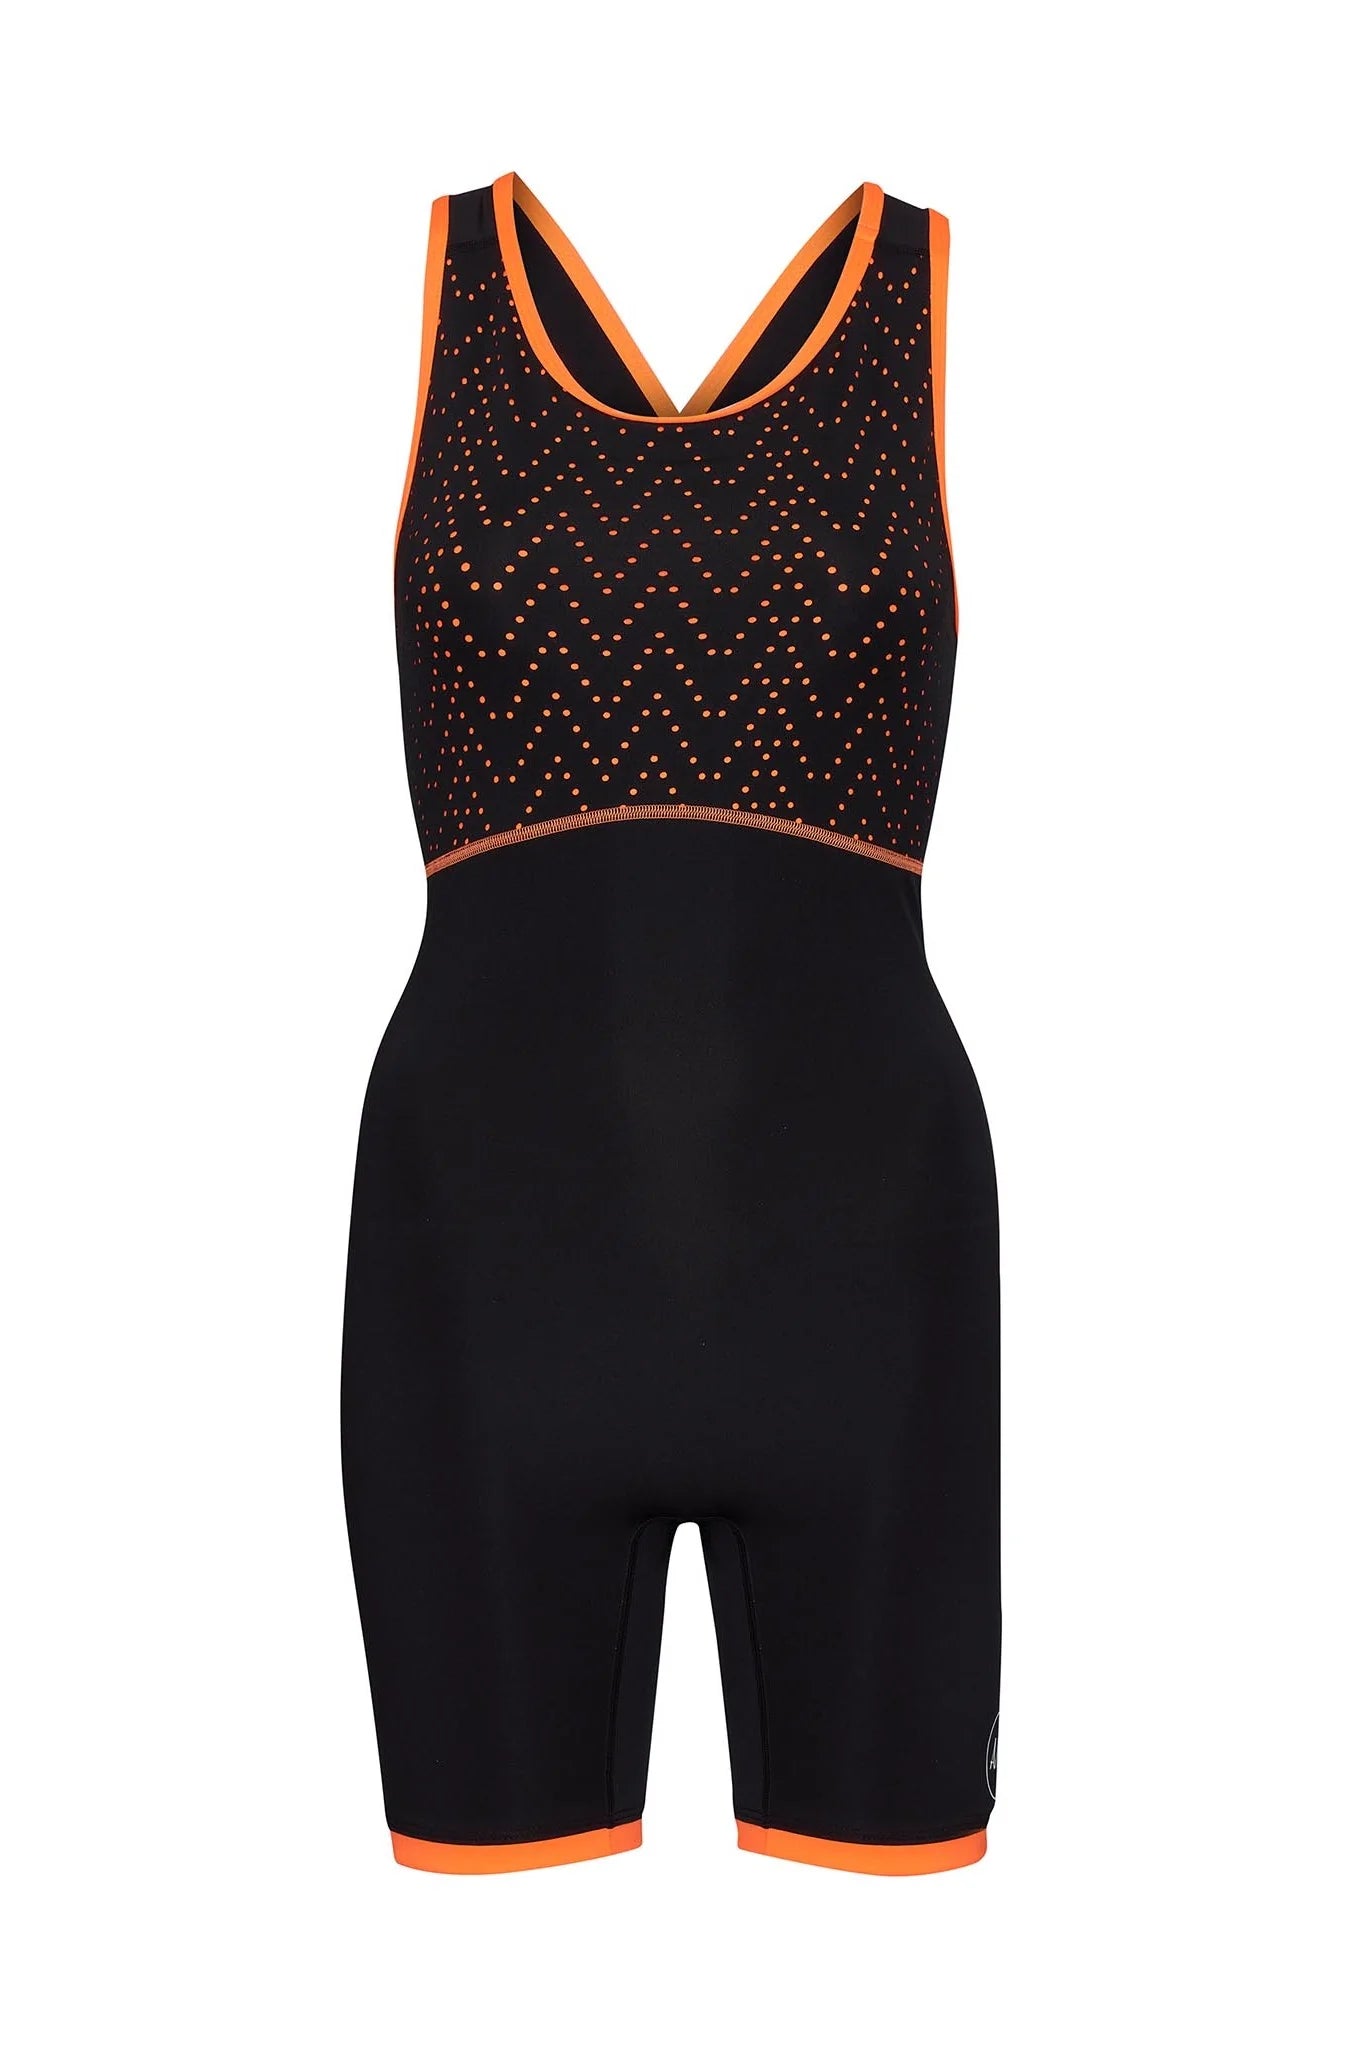 Perforated Neon Cross Back Zootie